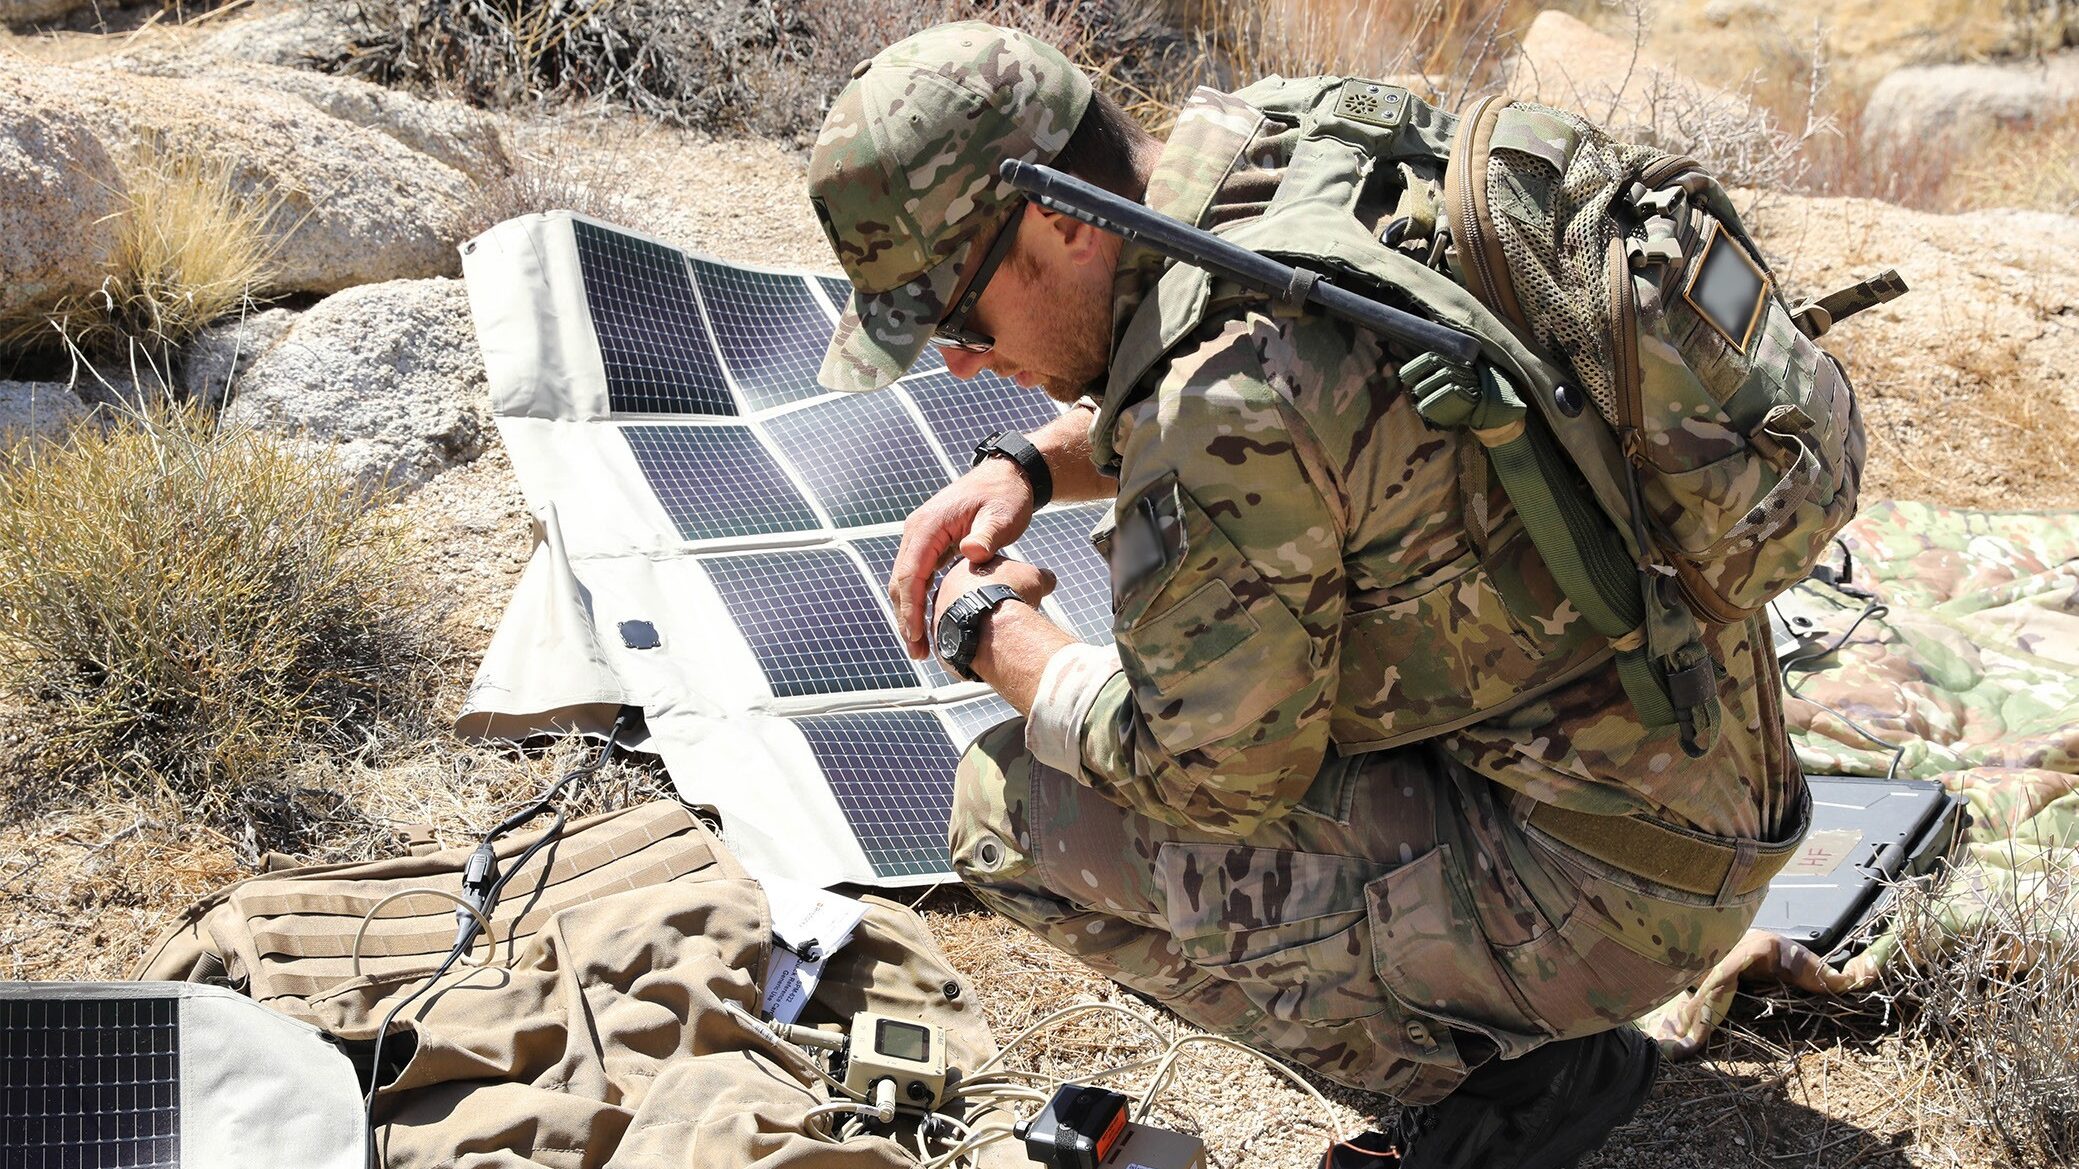 As Army begins electrification push, C5ISR office aims to smooth bumps in the road